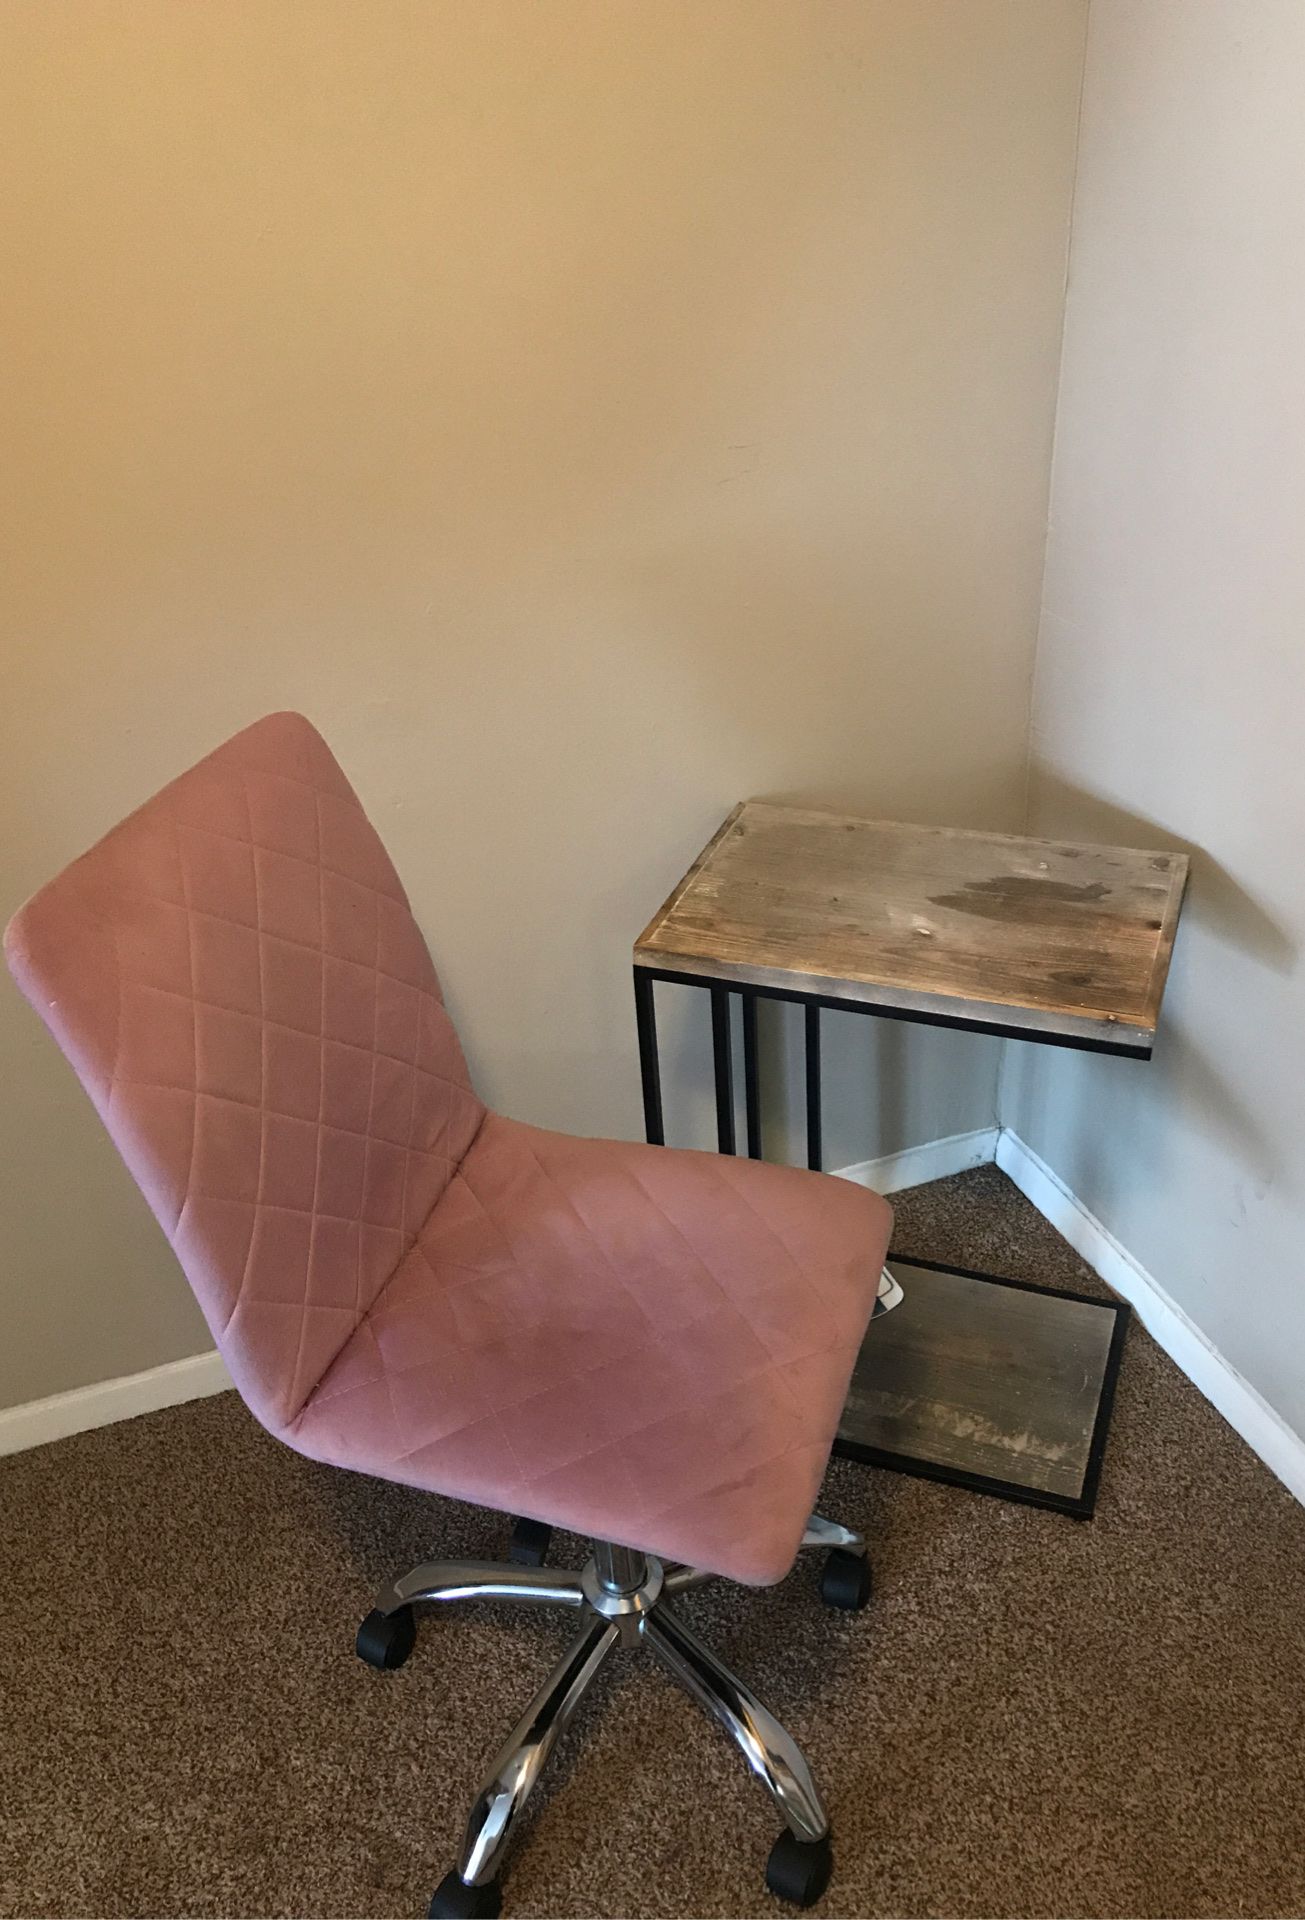 Mini table and computer chair